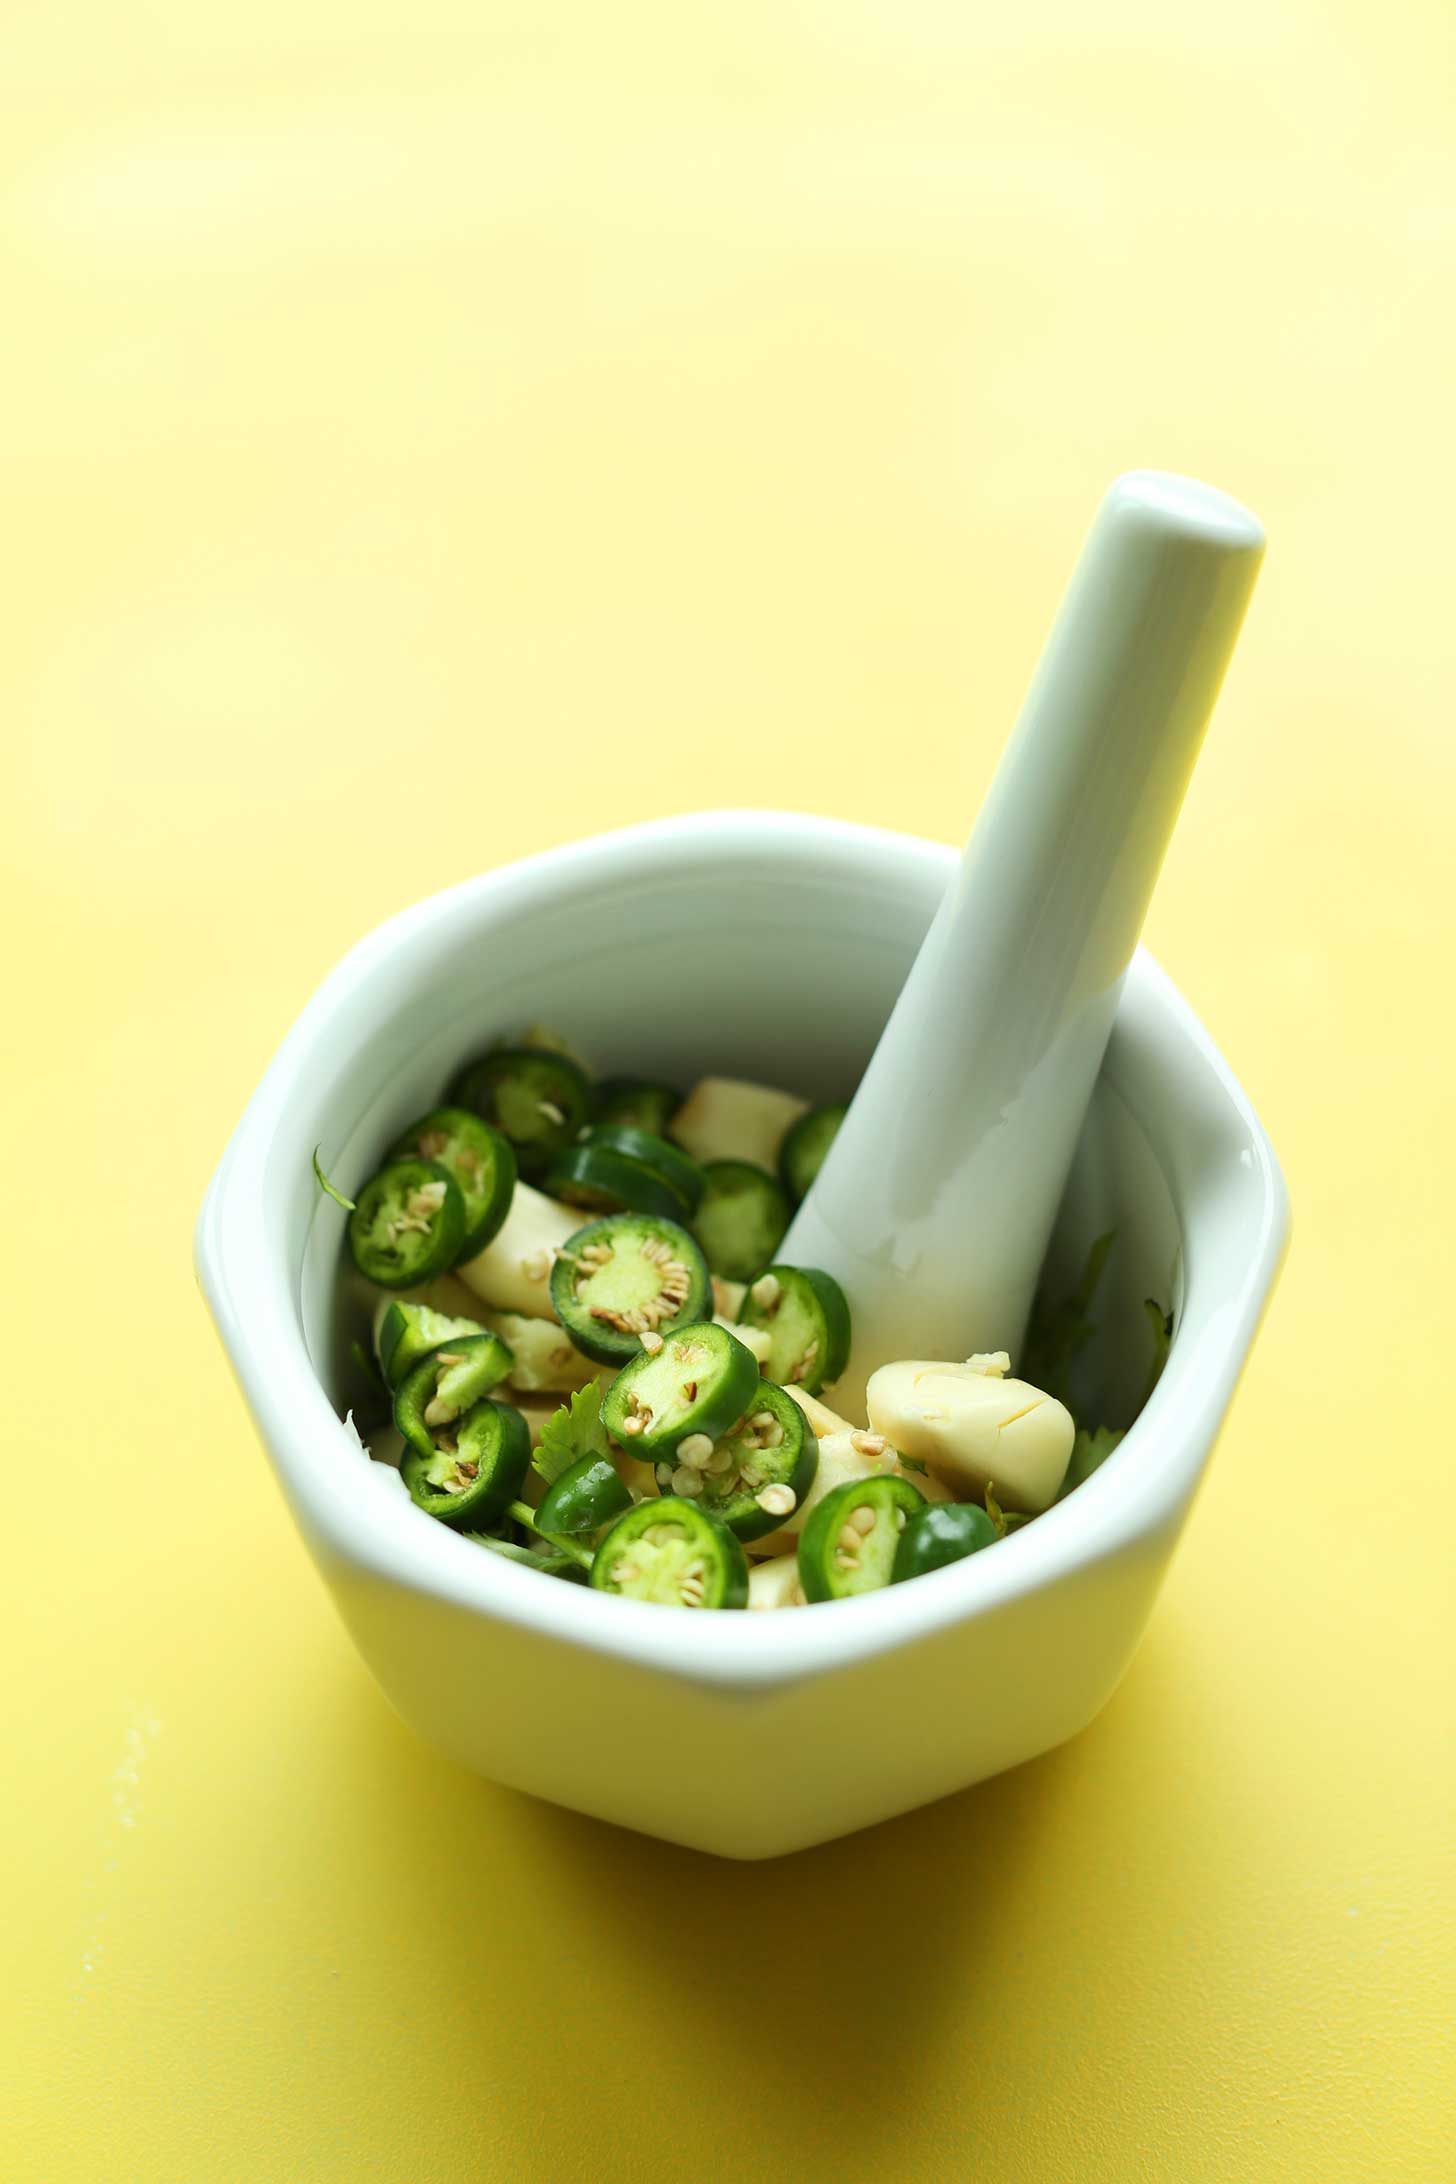 Mortar and pestle with jalapenos and garlic for making our easy chana masala recipe